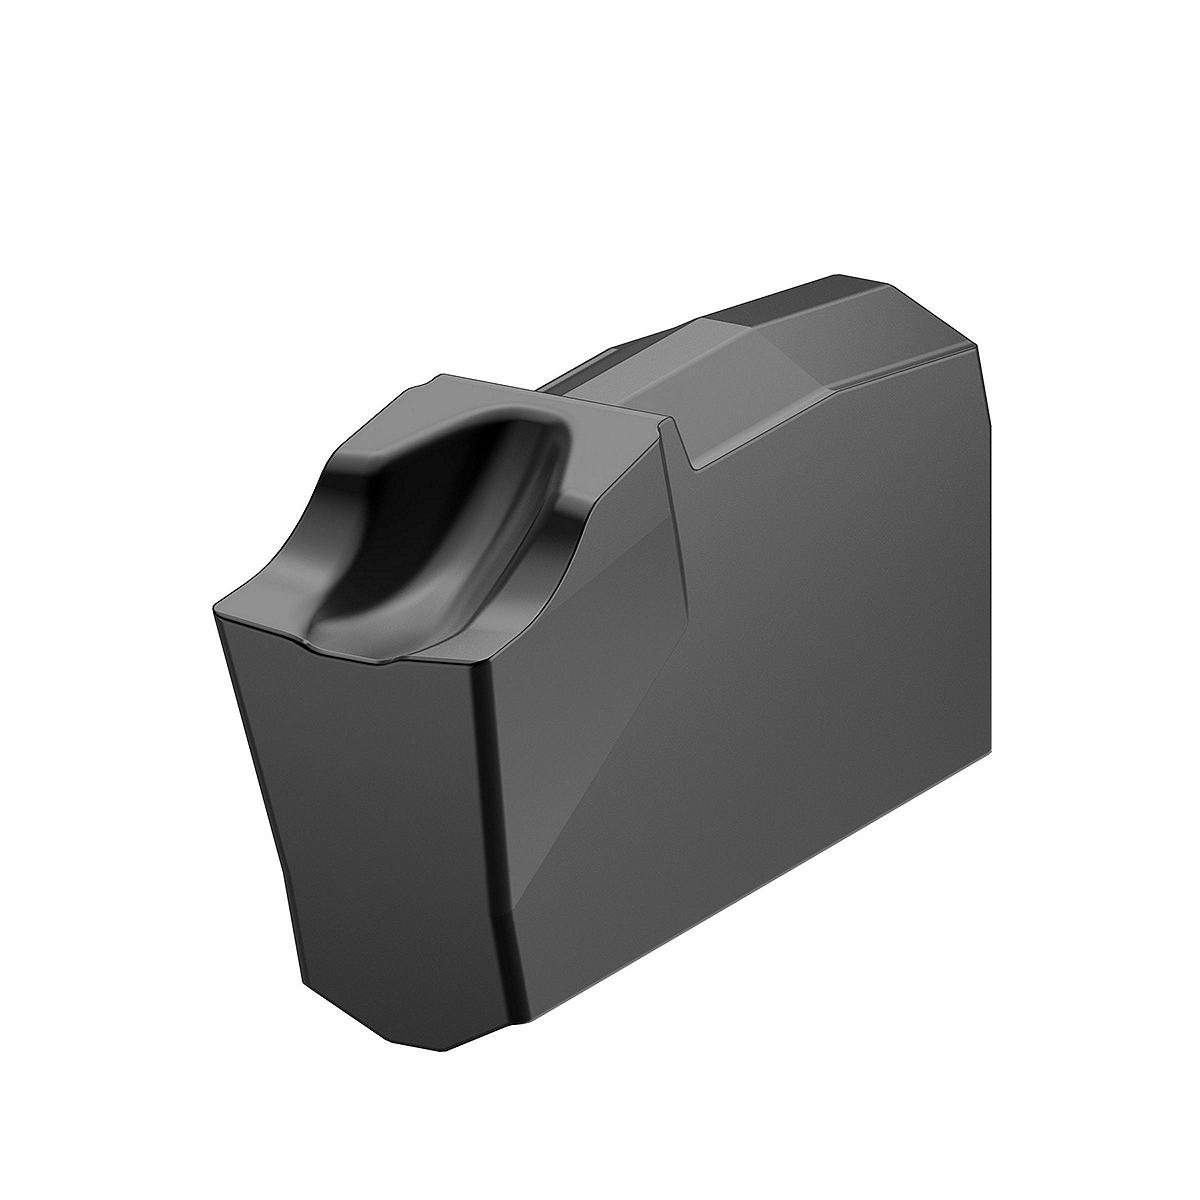 Single-sided slot milling insert for non-ferrous materials, high temperature alloys.